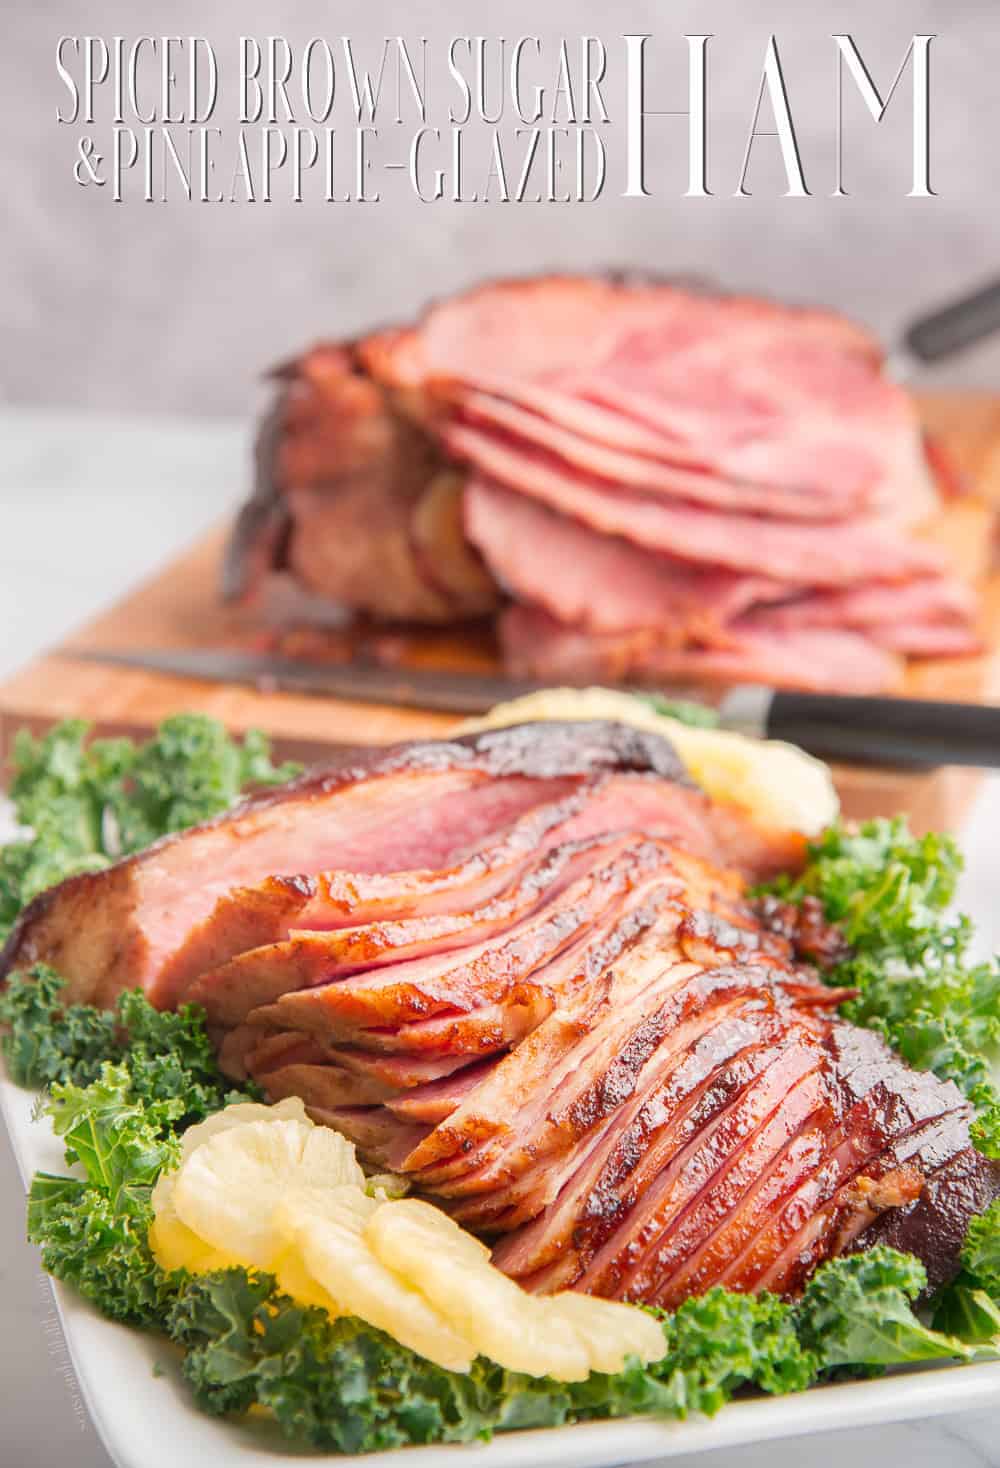 This Spiced Brown Sugar and Pineapple-Glazed Ham needs to be the star of your next dinner. A spicy (and spiced) sweet glaze is brushed on a juicy ham to bring a twist of flavor to your holiday or Sunday meal. #ham #Christmasham #Easterham #Thanksgivingham #pineappleham #brownsugarglazedham #glazedham #holidayham #roastpork #soulfood #PuertoRicanrecipes #hamrecipe #hamdinner #leftoverham #holidayham #hamdinner via @ediblesense